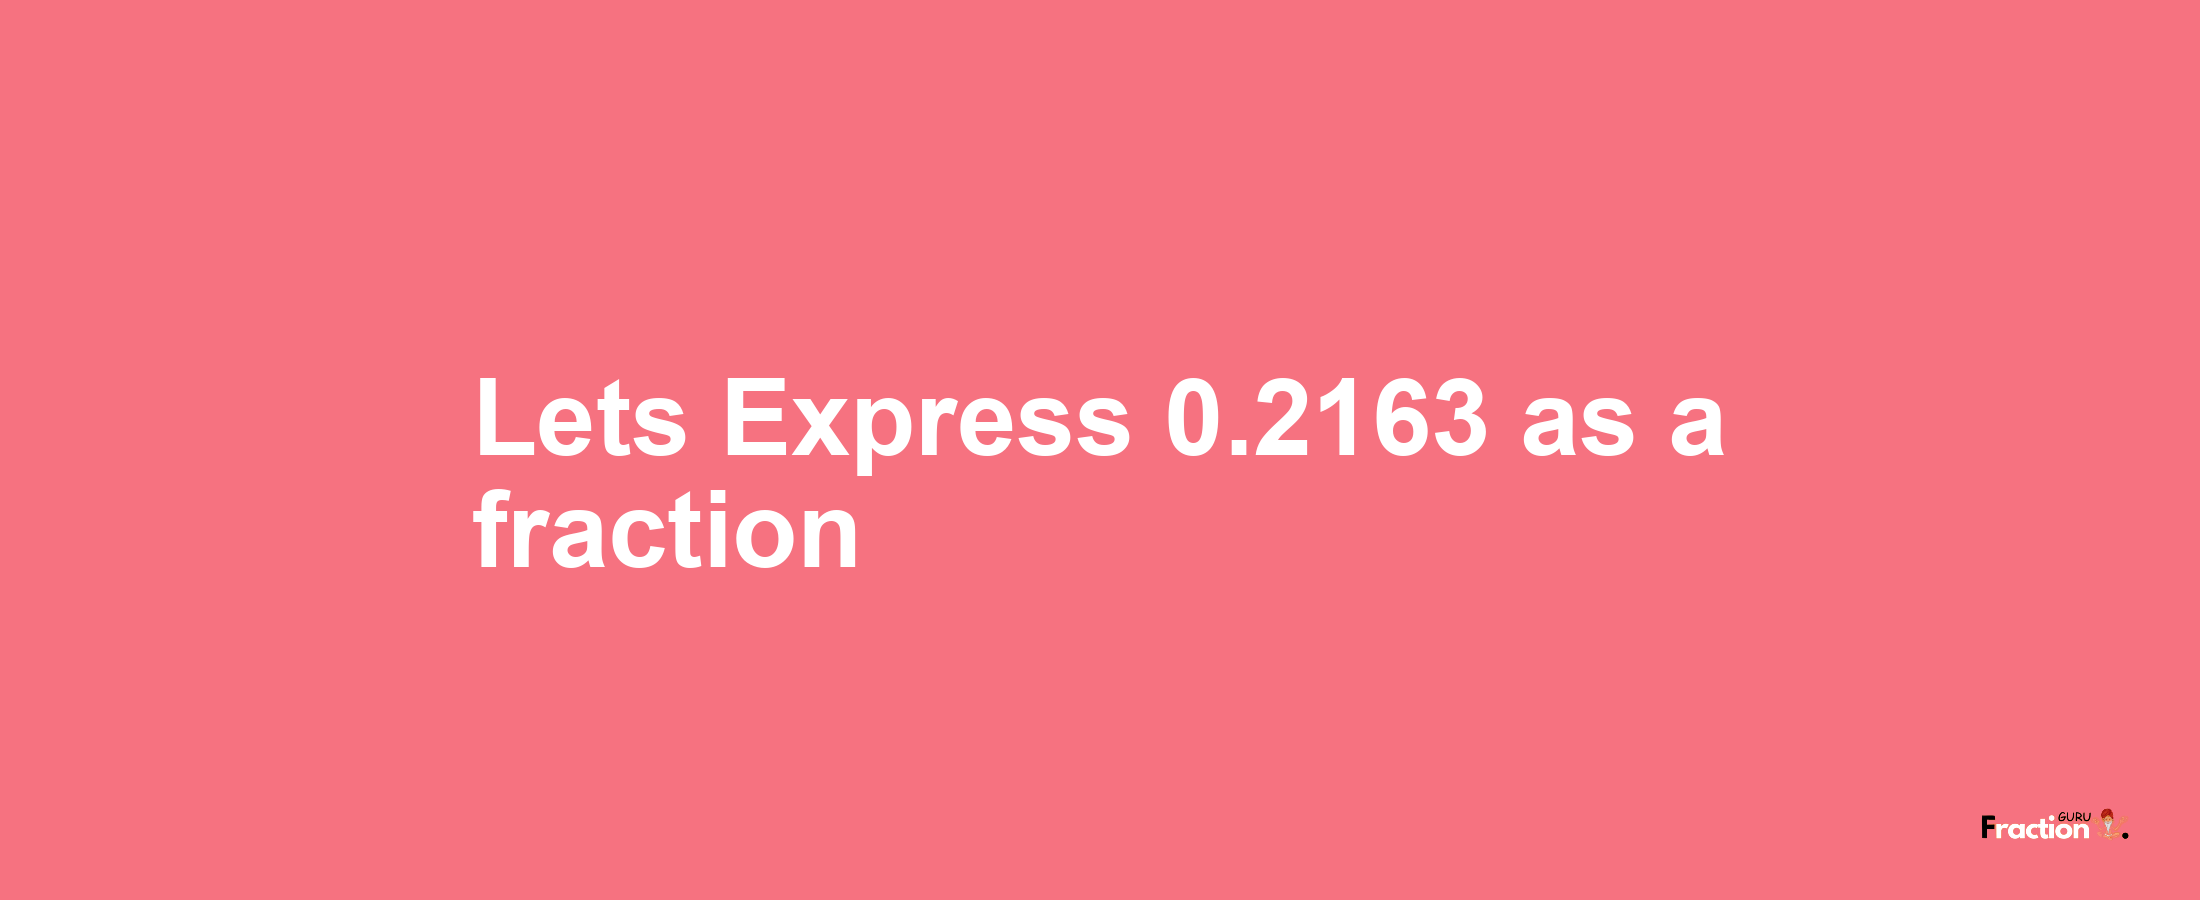 Lets Express 0.2163 as afraction